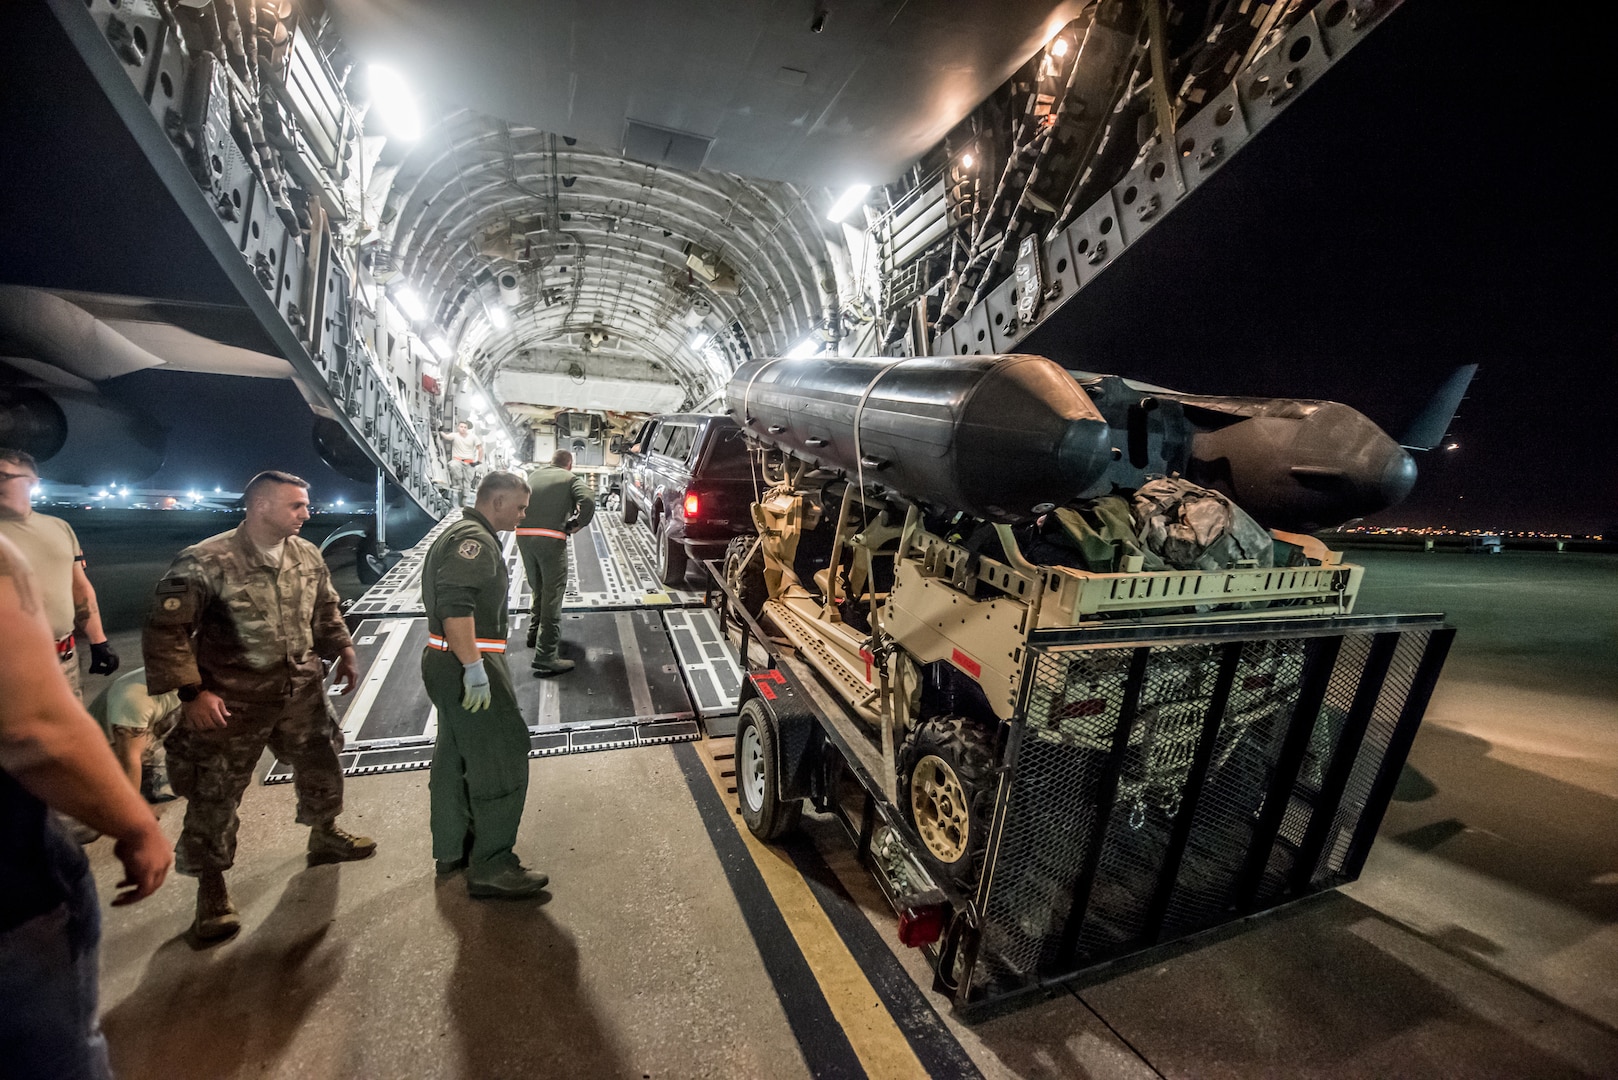 Airmen from the 123rd Airlift Wing load vehicles and cargo onto a C-17 Globemaster III aircraft at the Kentucky Air National Guard Base in Louisville, Ky., Sept. 15, 2018, in response to Tropical Storm Florence. The gear and 10 Airmen from the 123rd Special Tactics Squadron are being deployed to Naval Air Station Oceana in Virginia Beach, Va., to provide stand-alone communications, air traffic control, personnel recovery and paramedic capabilities in response to massive flooding.